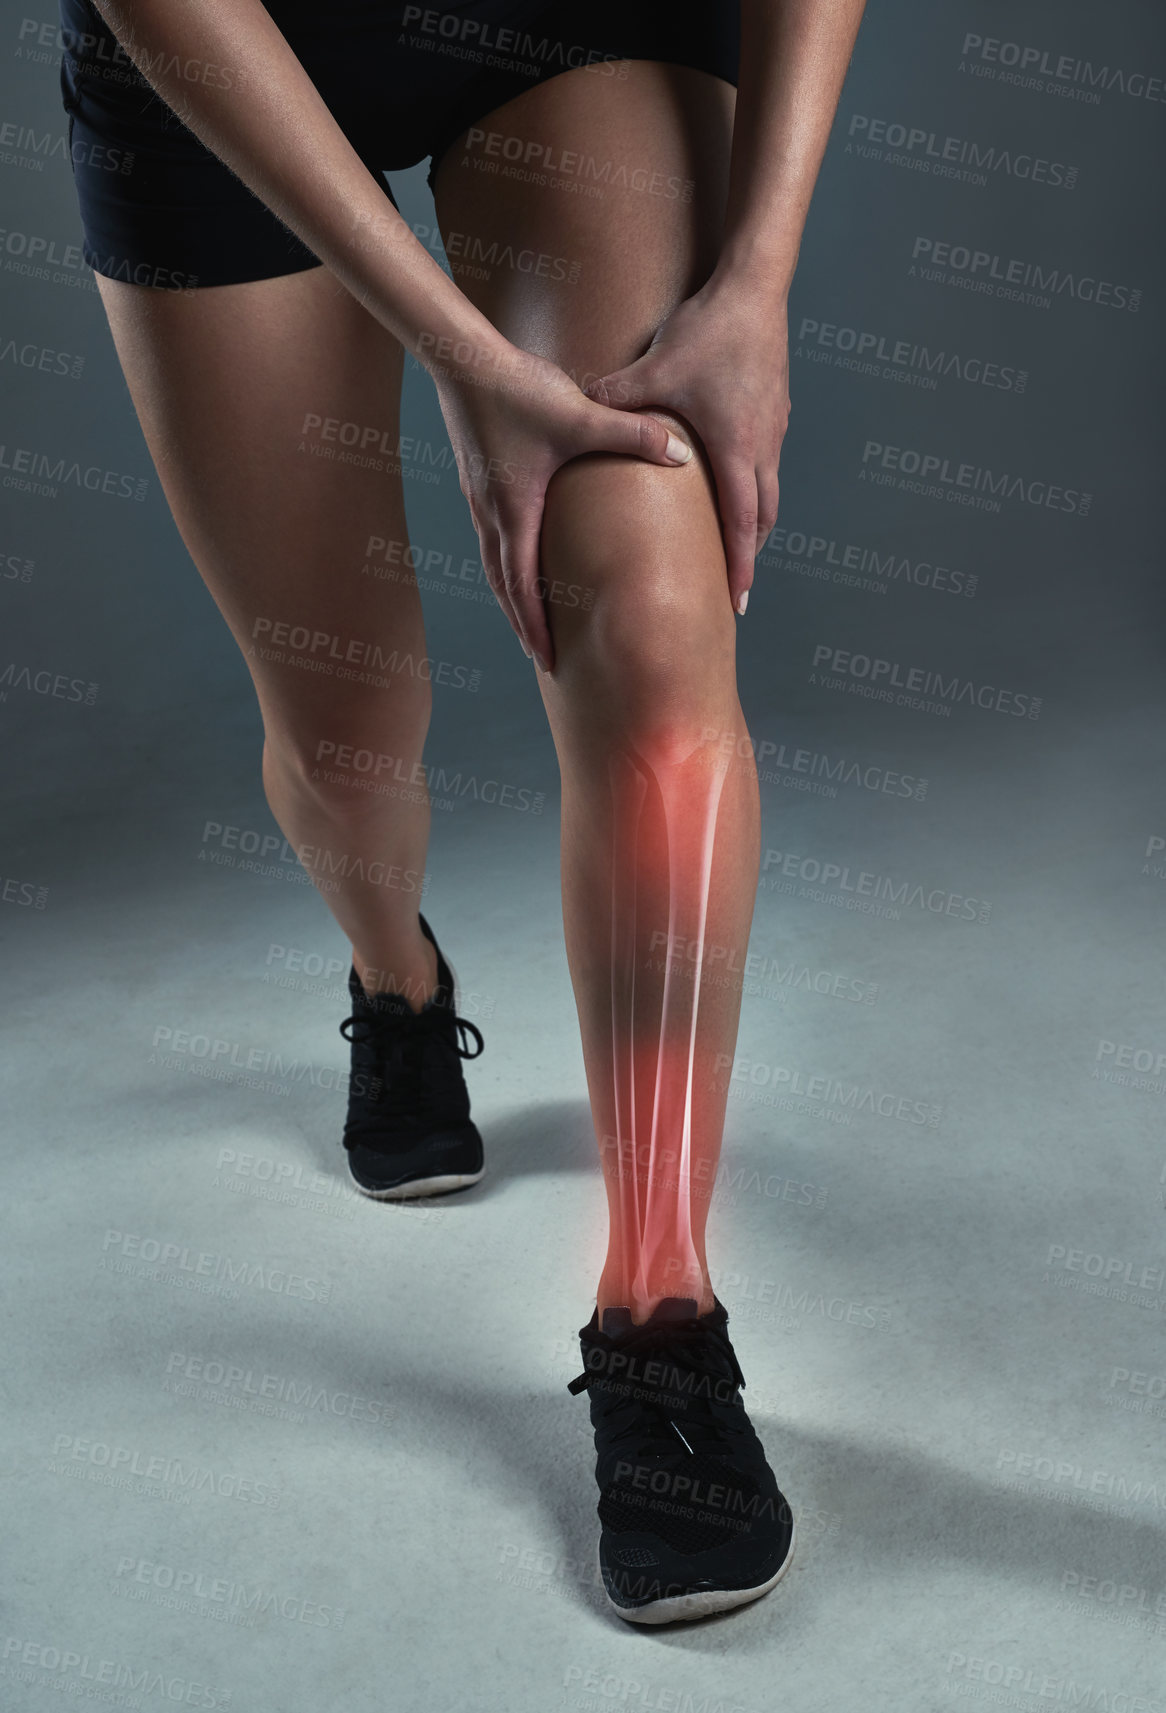 Buy stock photo Studio, athlete and legs with knee pain or injury with inflammation from exercise and workout. Female person, muscle ache and hurt from fitness, self care and wellness with wellbeing for health